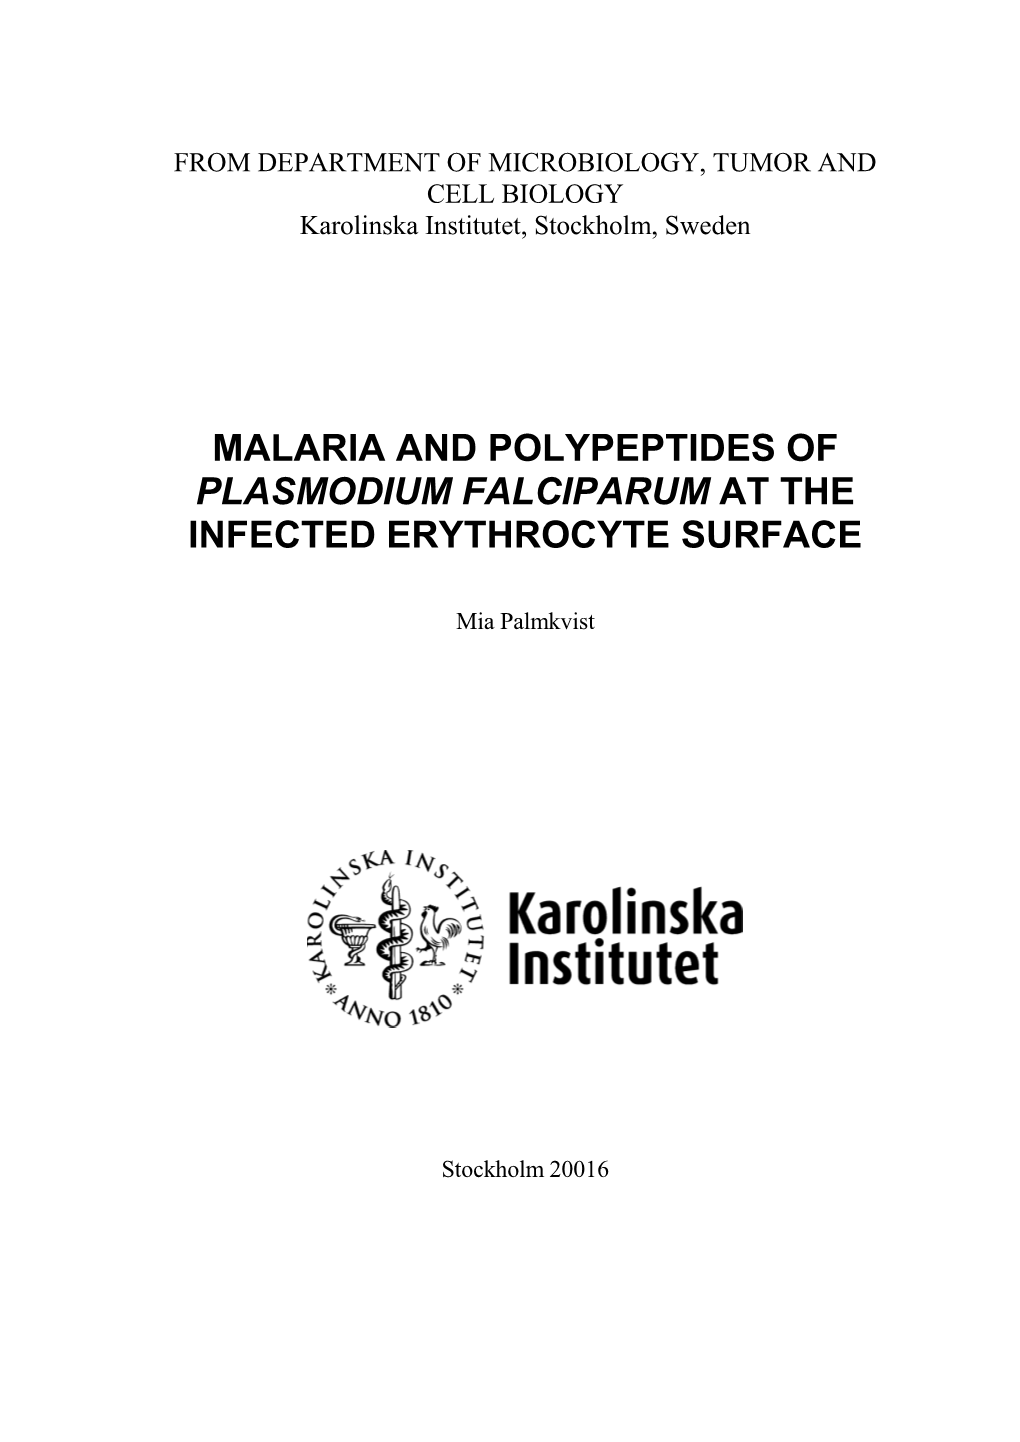 Malaria and Polypeptides of Plasmodium Falciparum at the Infected Erythrocyte Surface